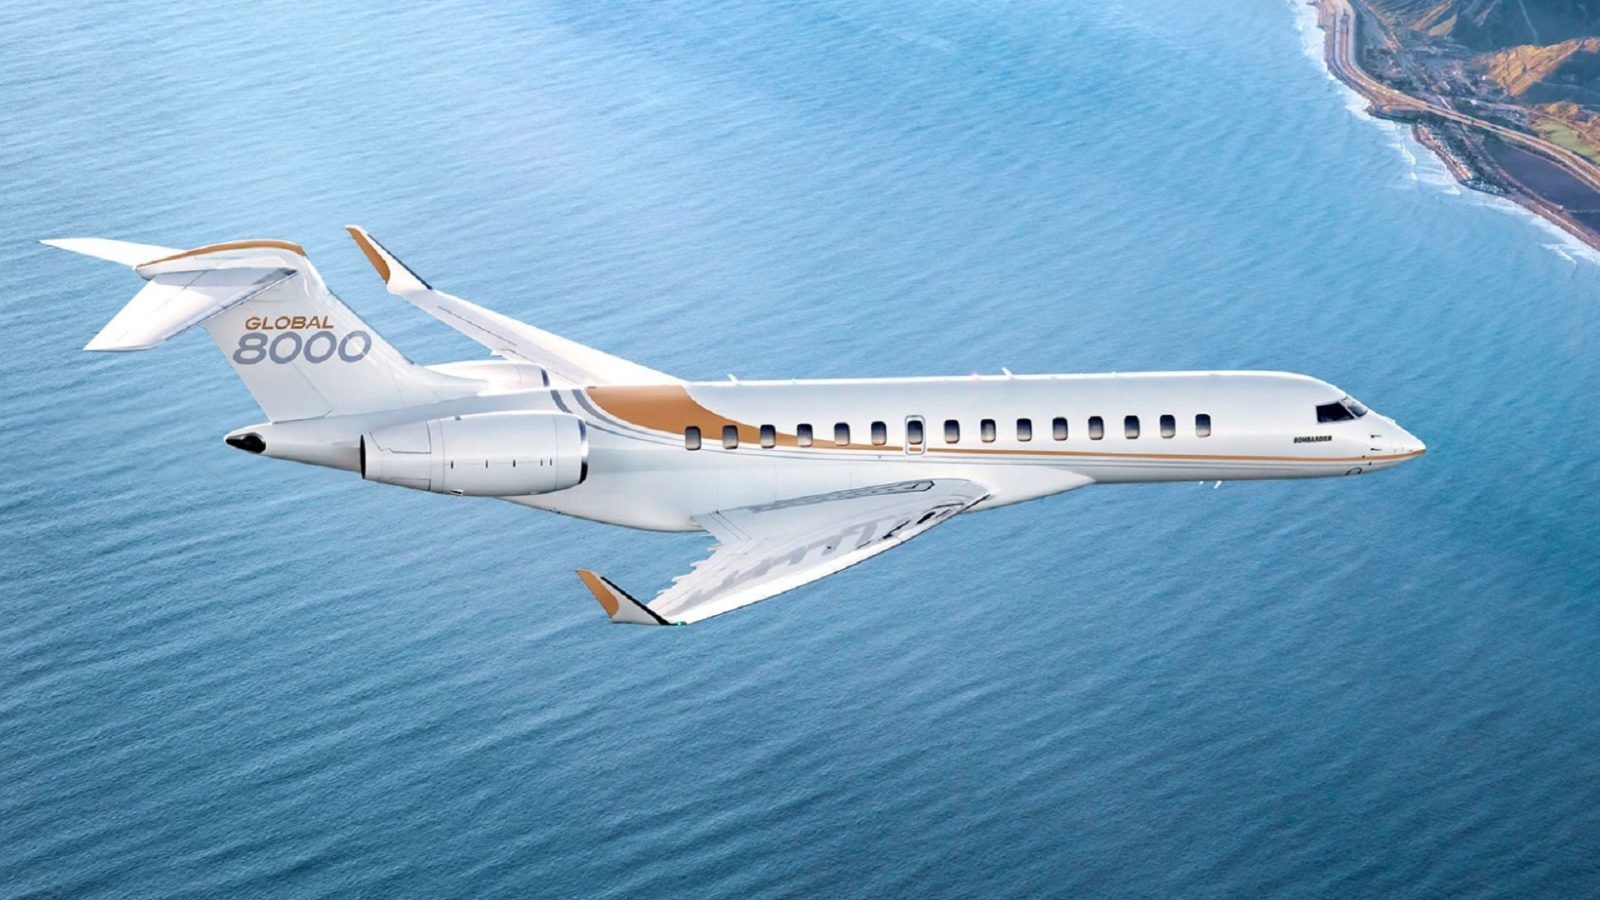 Bombardier unveils Global 8000, the world’s fastest business jet